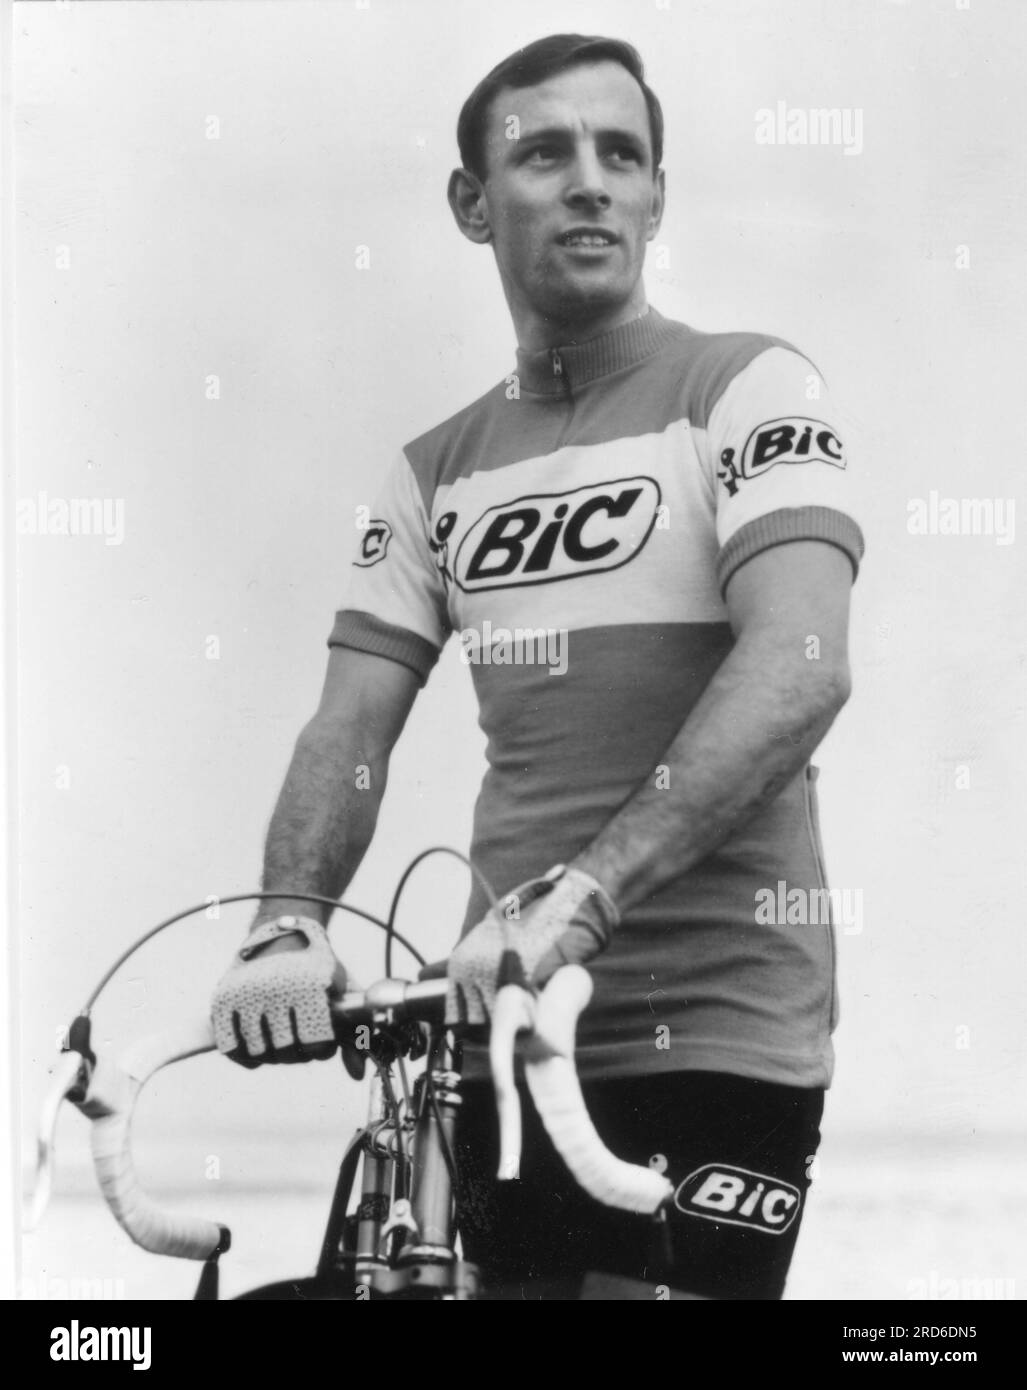 Wolfshohl, Rolf, * 27.12.1938, atleta tedesco (ciclista da corsa), gennaio 1967, ADDITIONAL-RIGHTS-CLEARANCE-INFO-NOT-AVAILABLE Foto Stock